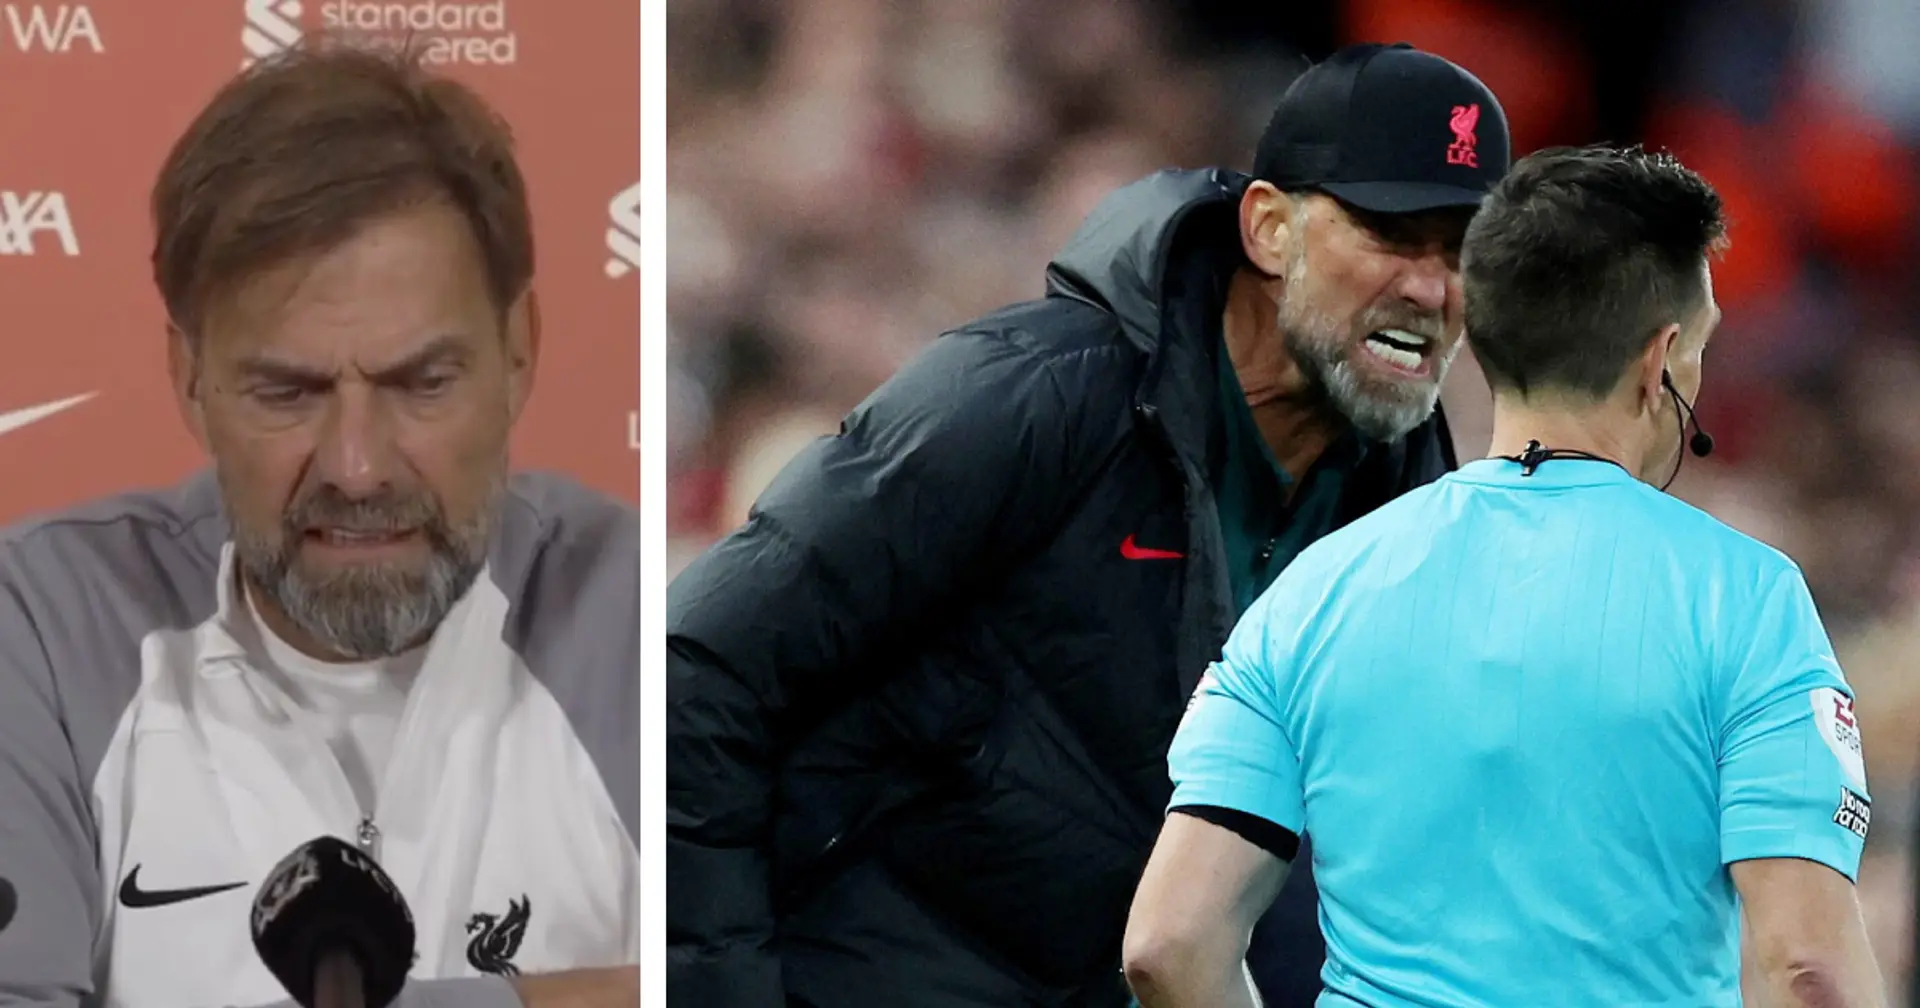 'I should have dealt differently with the situation': Klopp explains his touchline outburst vs City